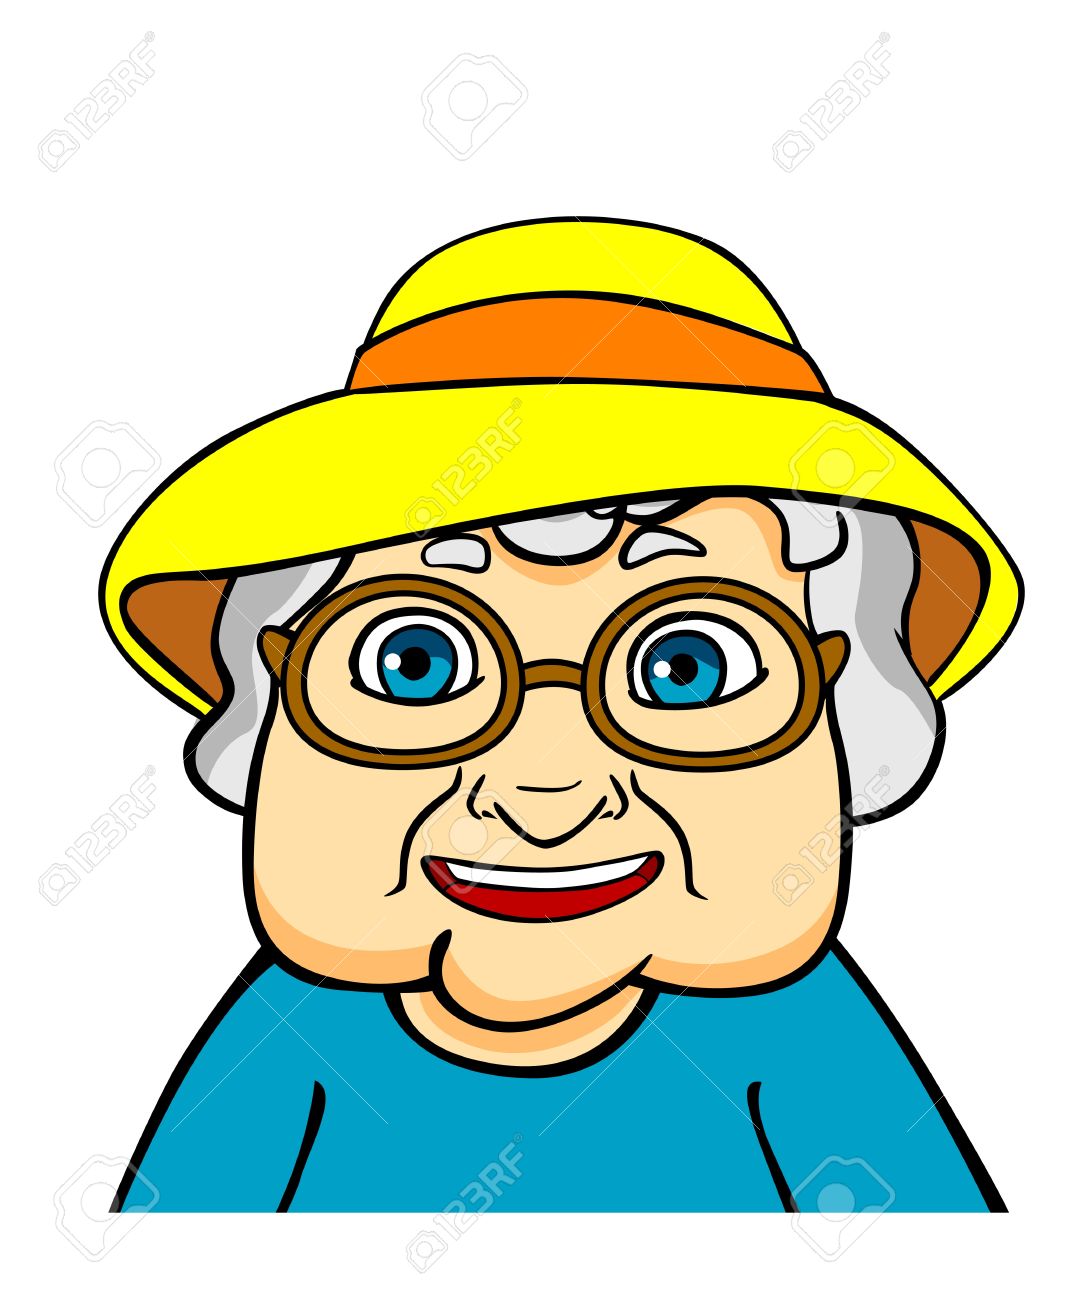 grandmother clipart face